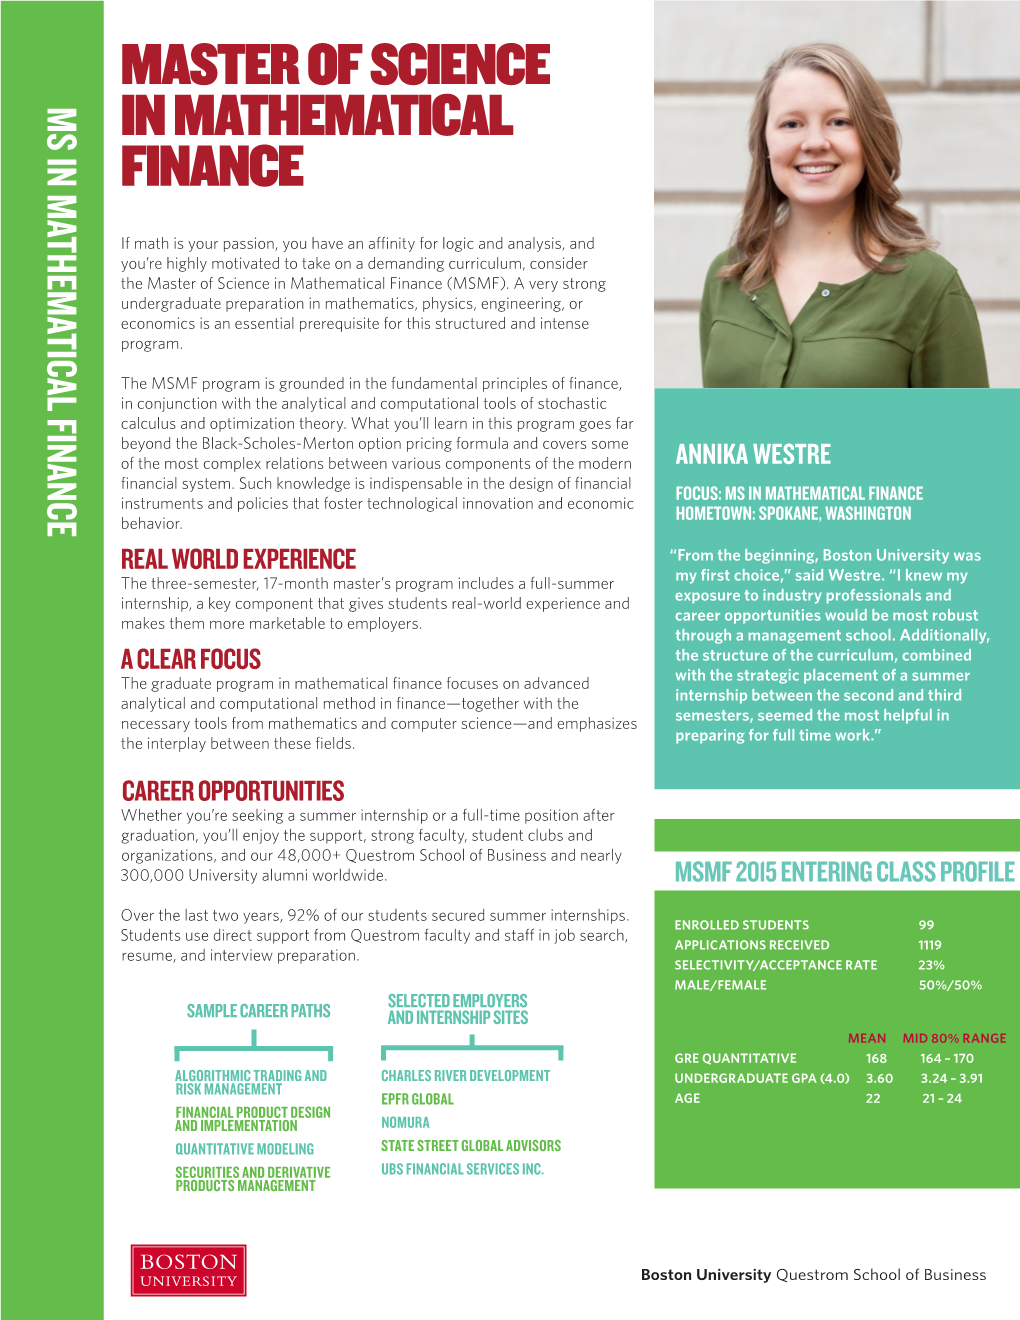 Master of Science in Mathematical Finance (MSMF)